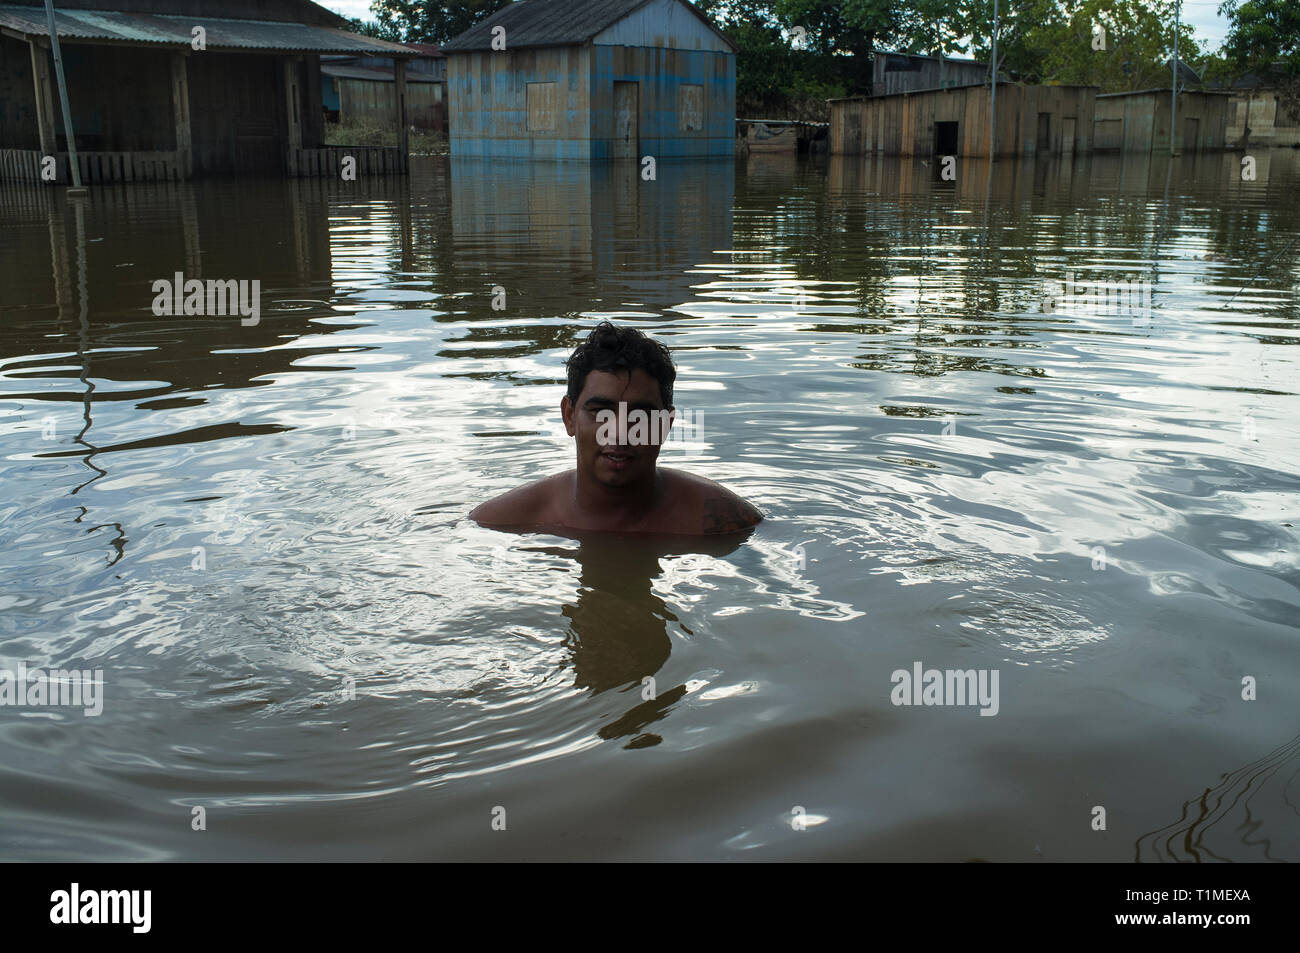 2015 flooding in Brazilian Amazon - flooded houses in Taquari district, Rio Branco city, Acre State. Jose Alcides dos Santos swims in the dark and dirt waters of Acre river. Floods have been affecting thousands of people in the state of Acre, northern Brazil, since 23 February 2015, when some of the state’s rivers, in particular the Acre river, overflowed. Further heavy rainfall has forced river levels higher still, and on 03 March 2015 Brazil’s federal government declared a state of emergency in Acre State, where current flood situation has been described as the worst in 132 years. Stock Photo